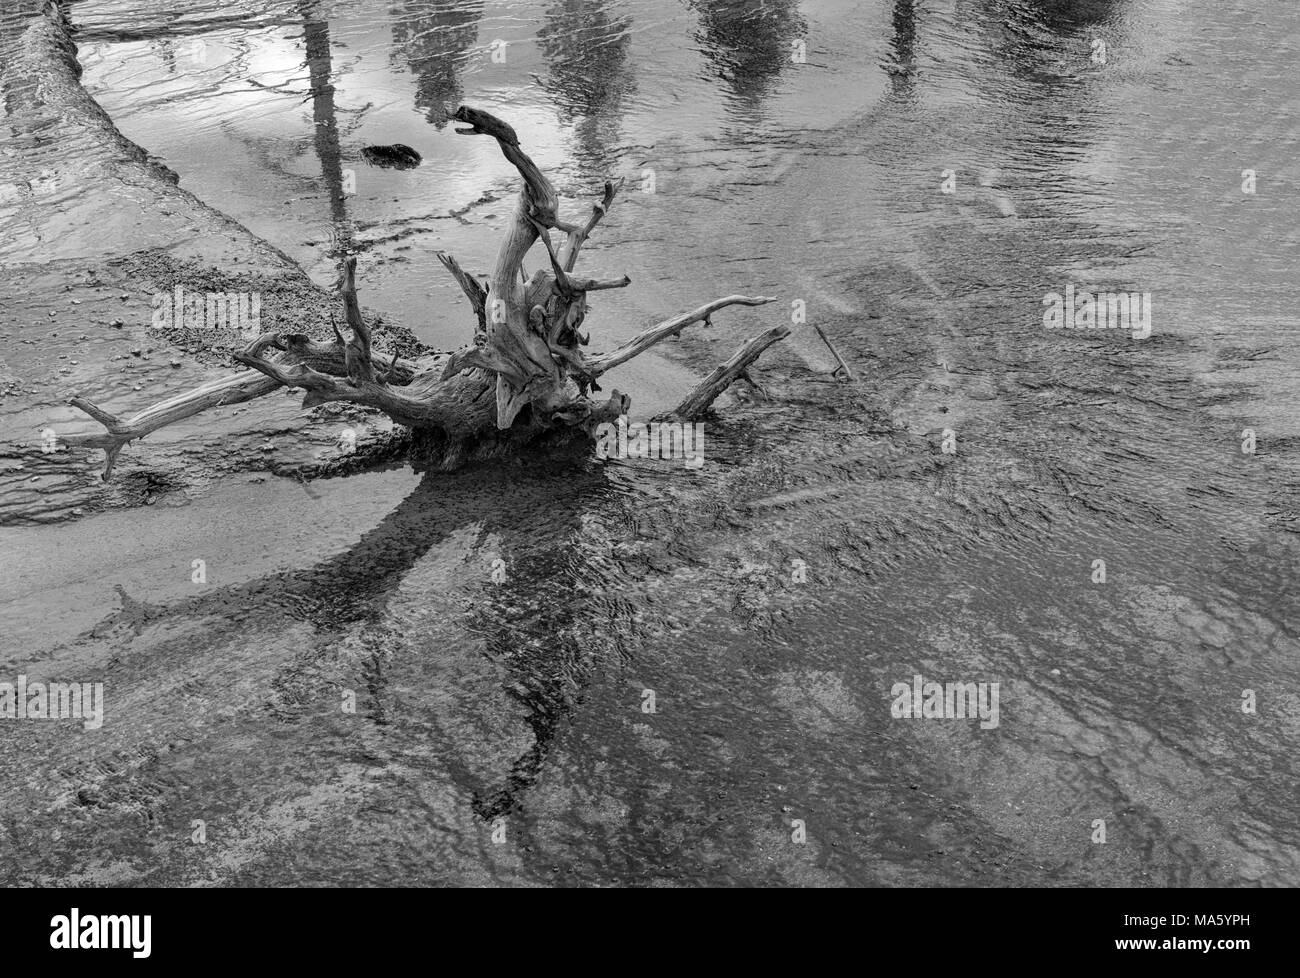 Shallow water with stump of dead tree, water waves and ripples. Black and white image. Stock Photo